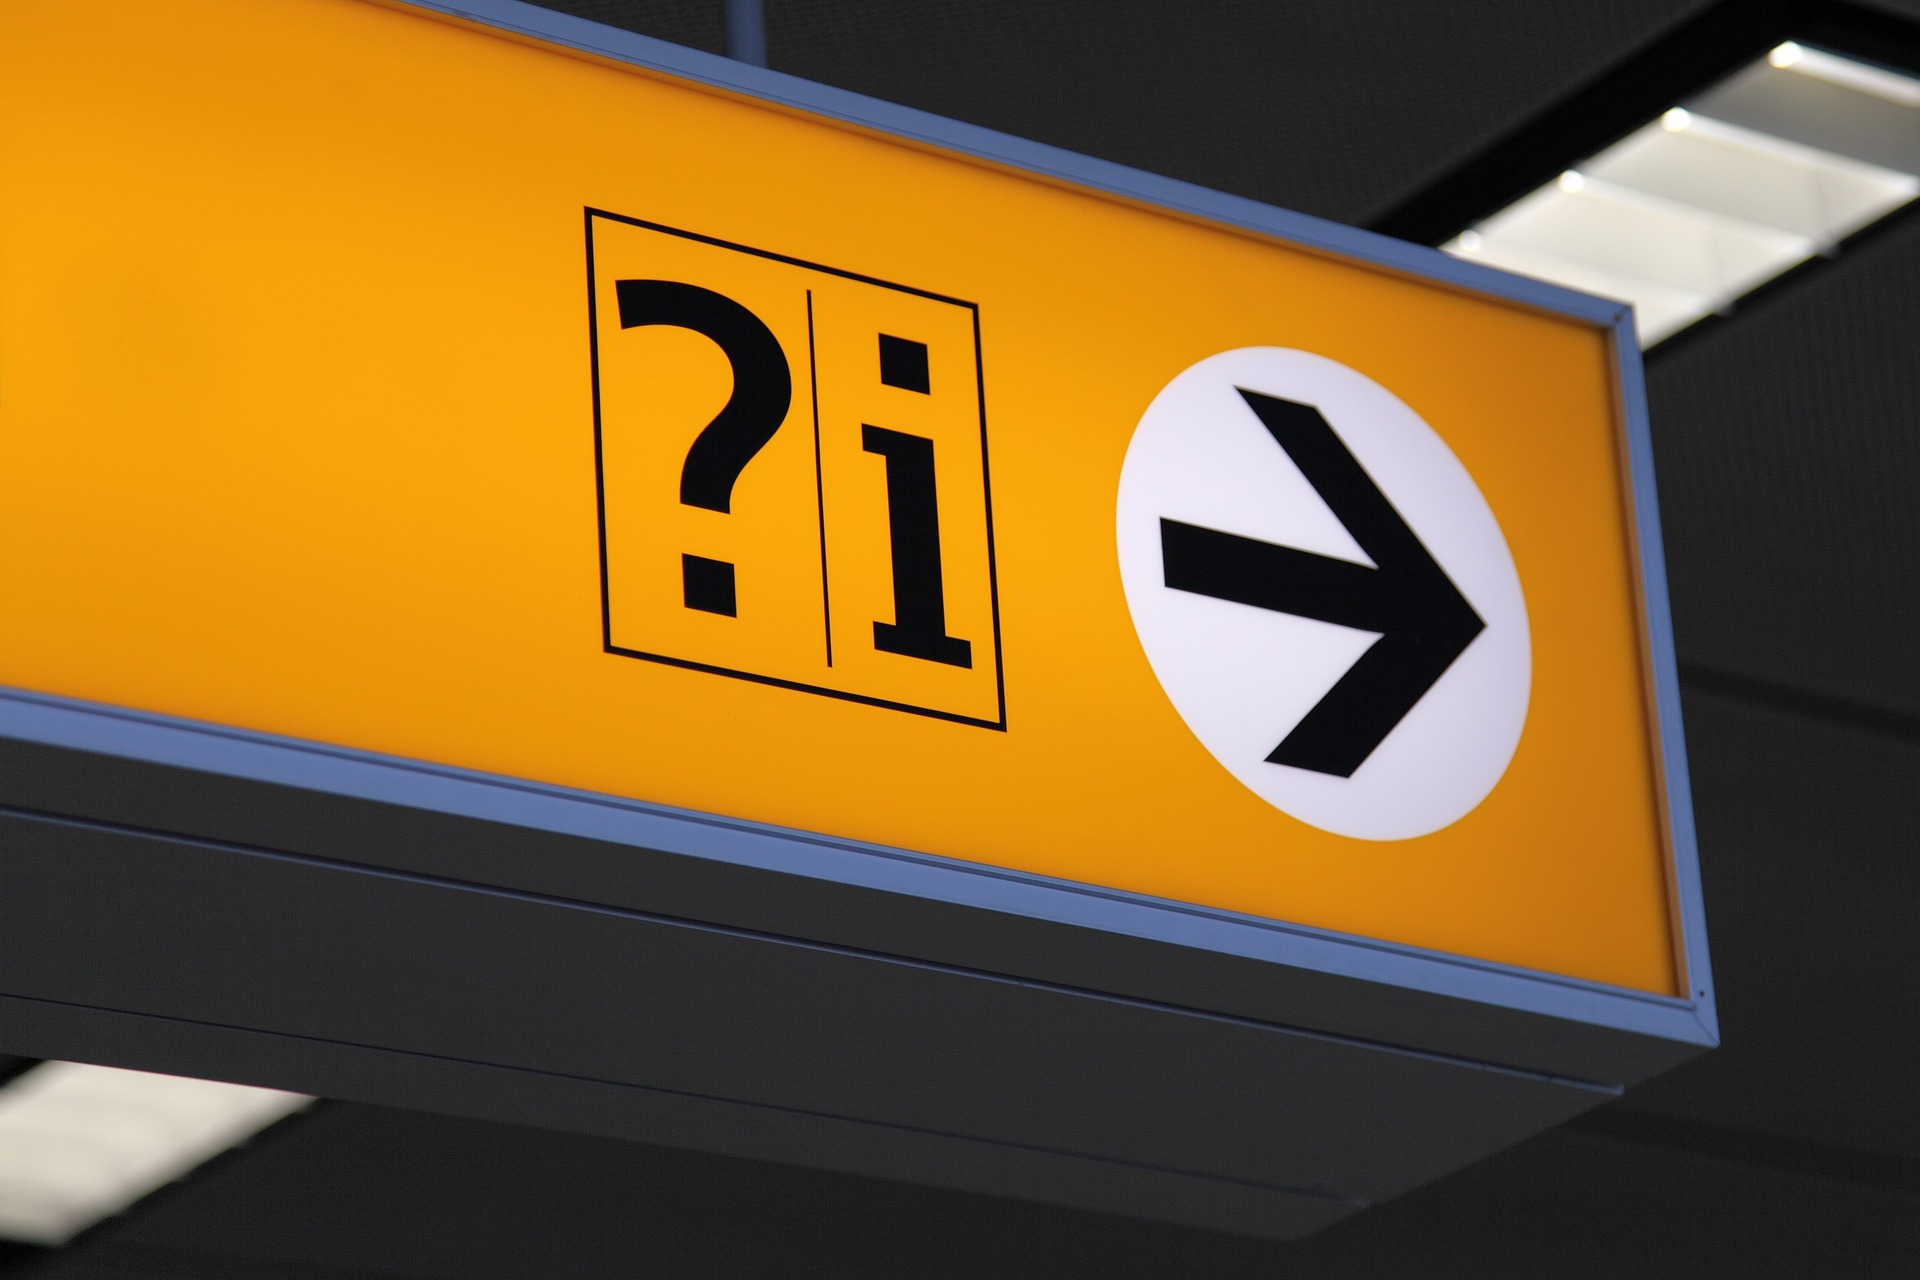 A yellow information sign with a question mark icon, an 'i' icon, and an arrow pointing to the right.